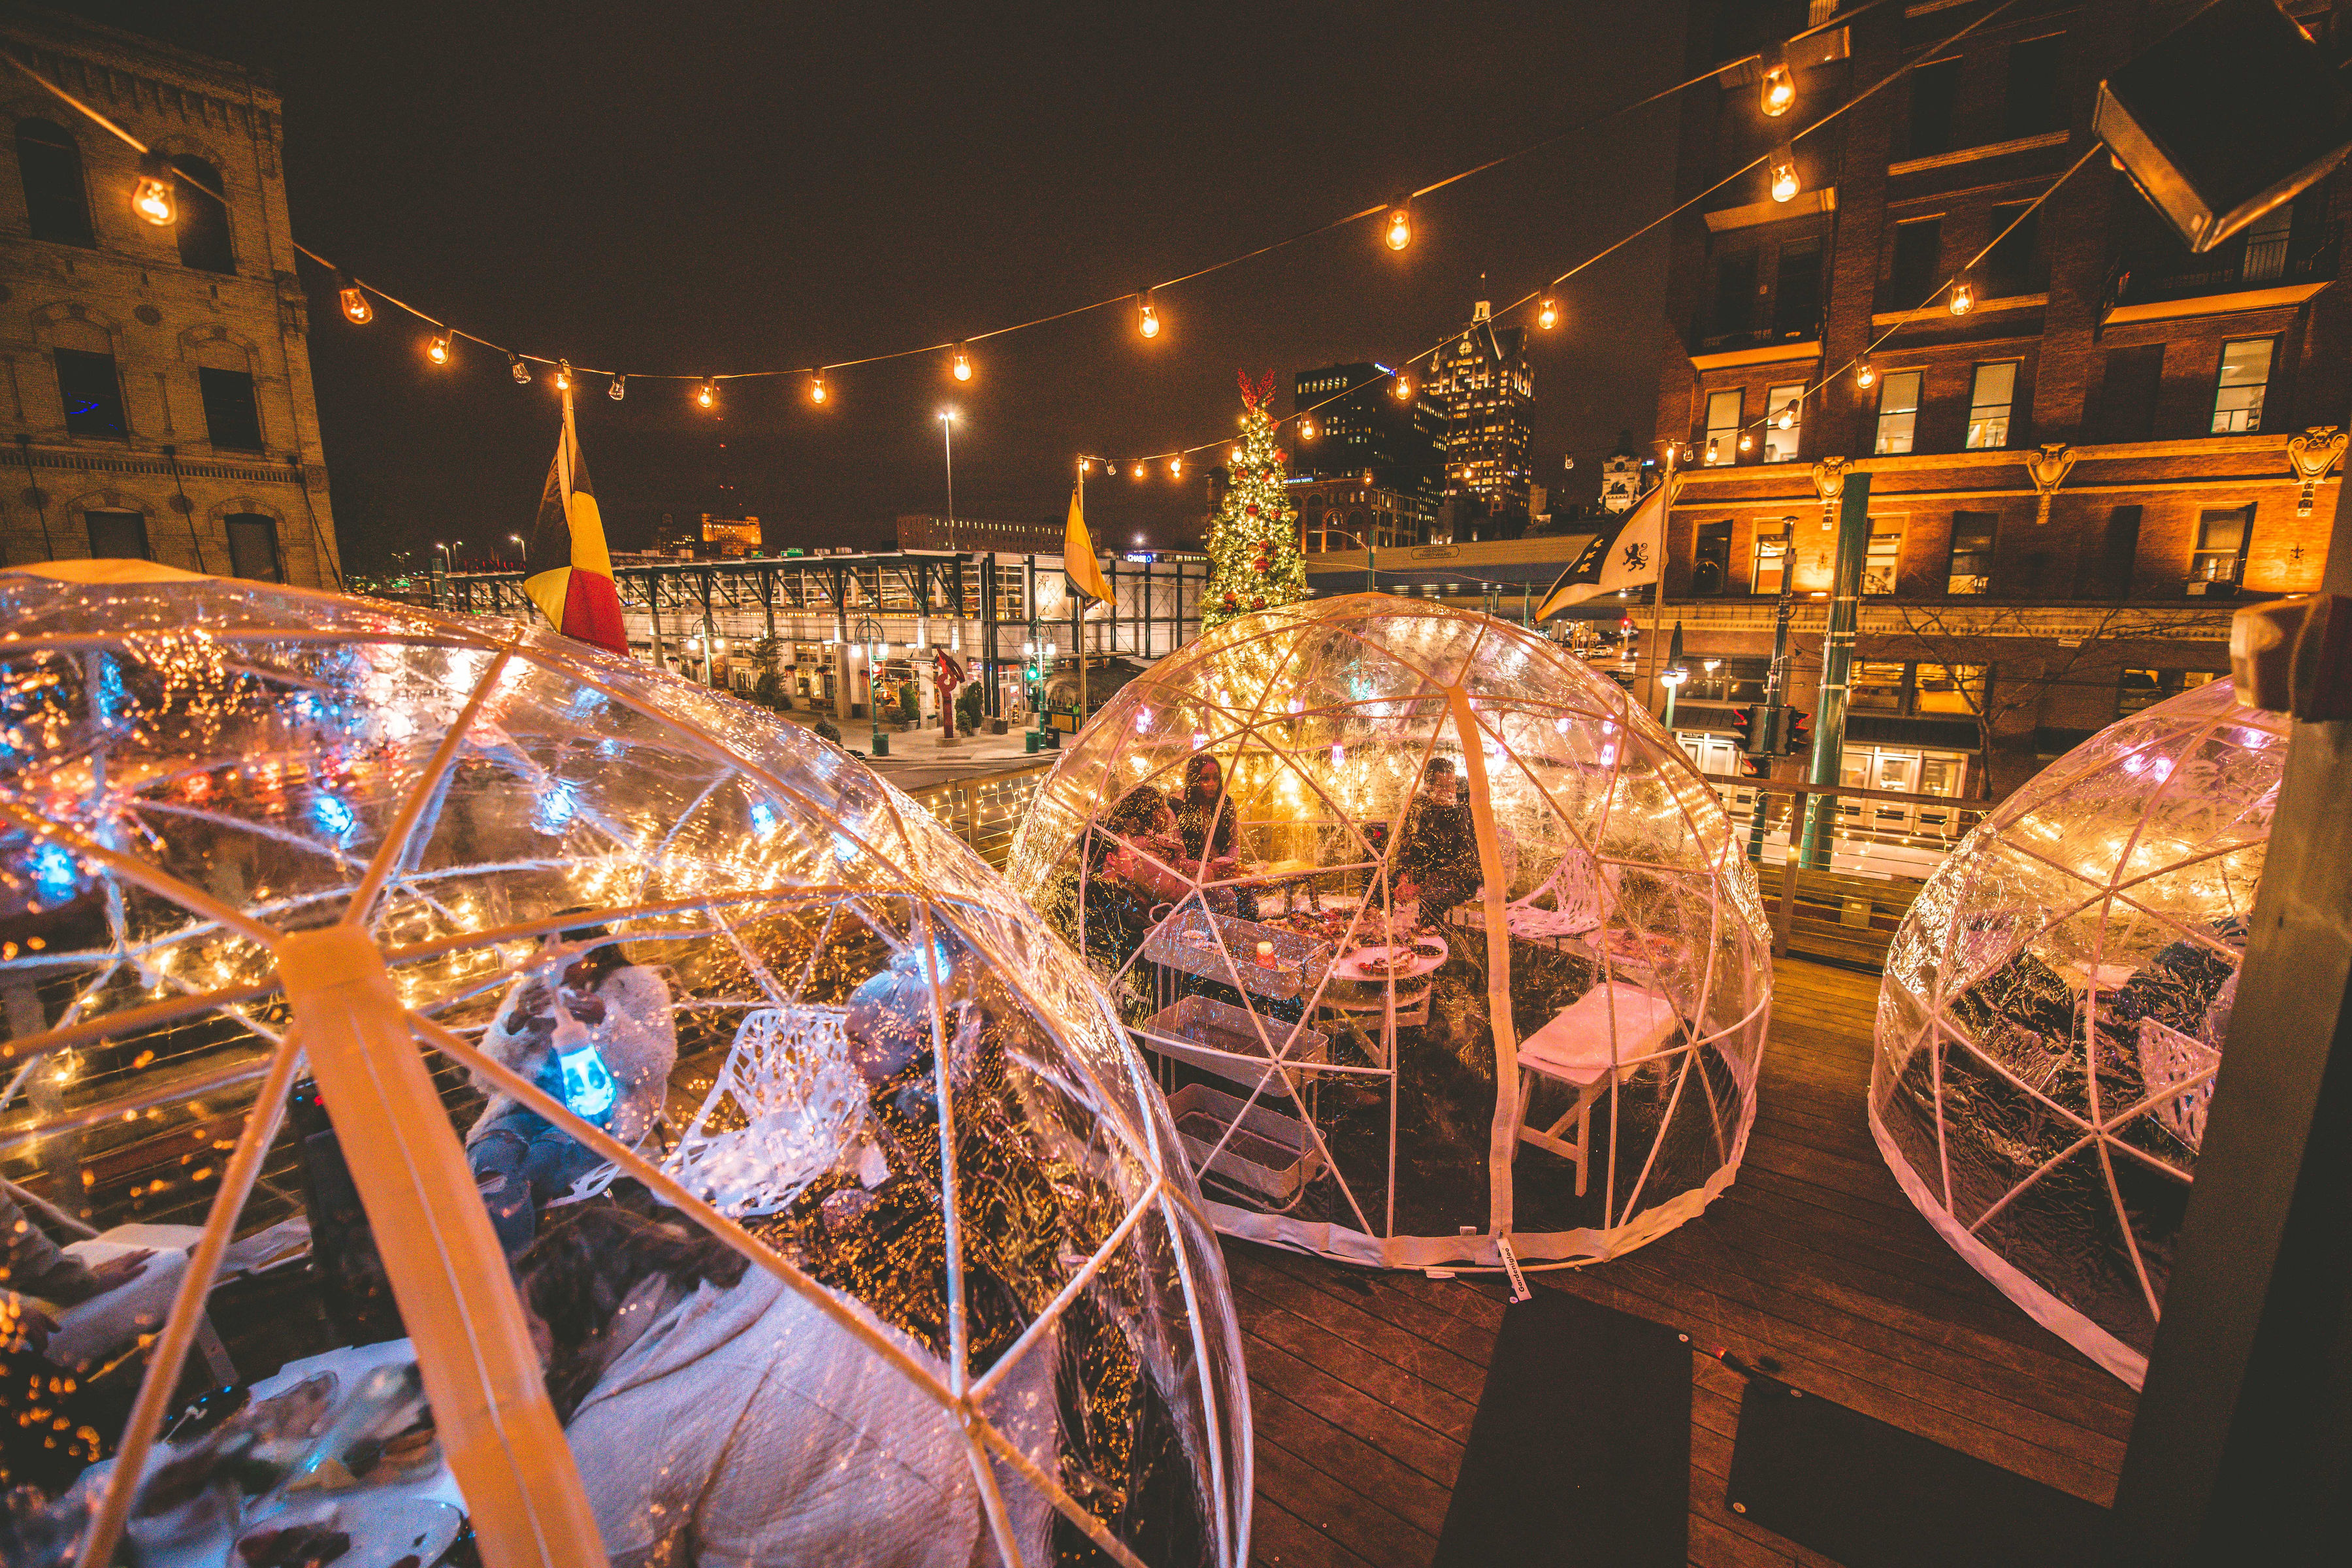 Lux Domes return to Cafe Benelux, plus winter patios at Centraal & more